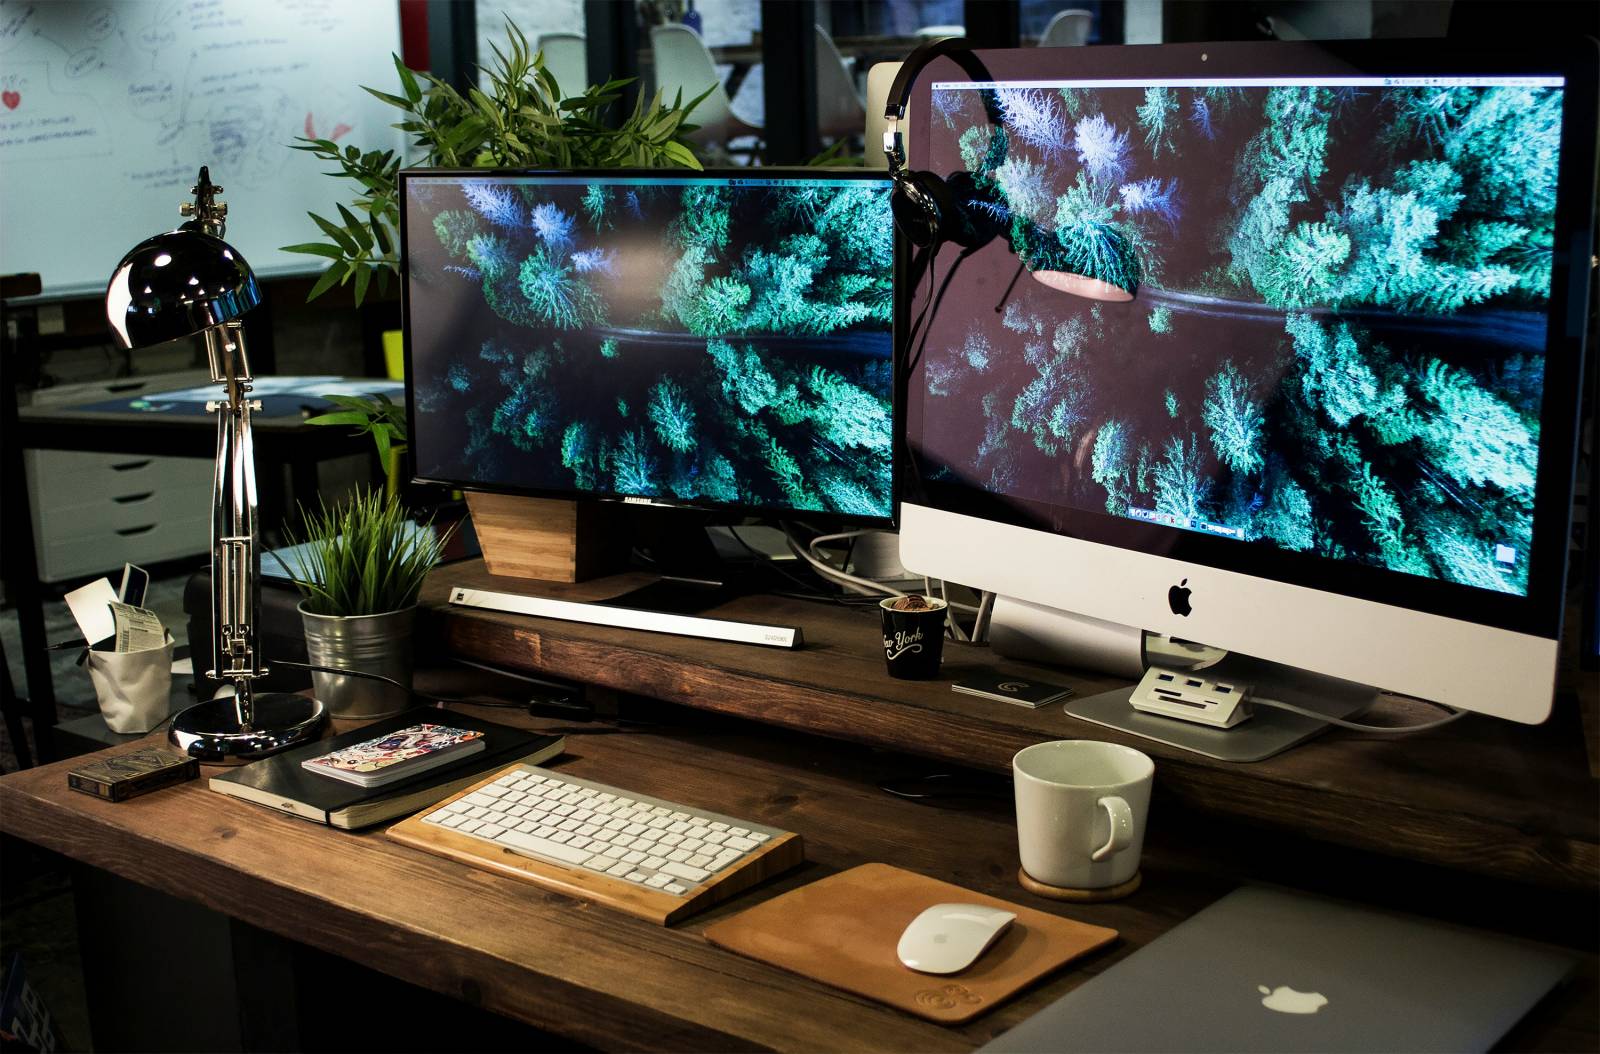 A neatly organized desk space with keyboard, mouse, notebooks, desk plants, a lamp, and a mug. Two computer monitors show mirror images of a forrest from a birds eye view.